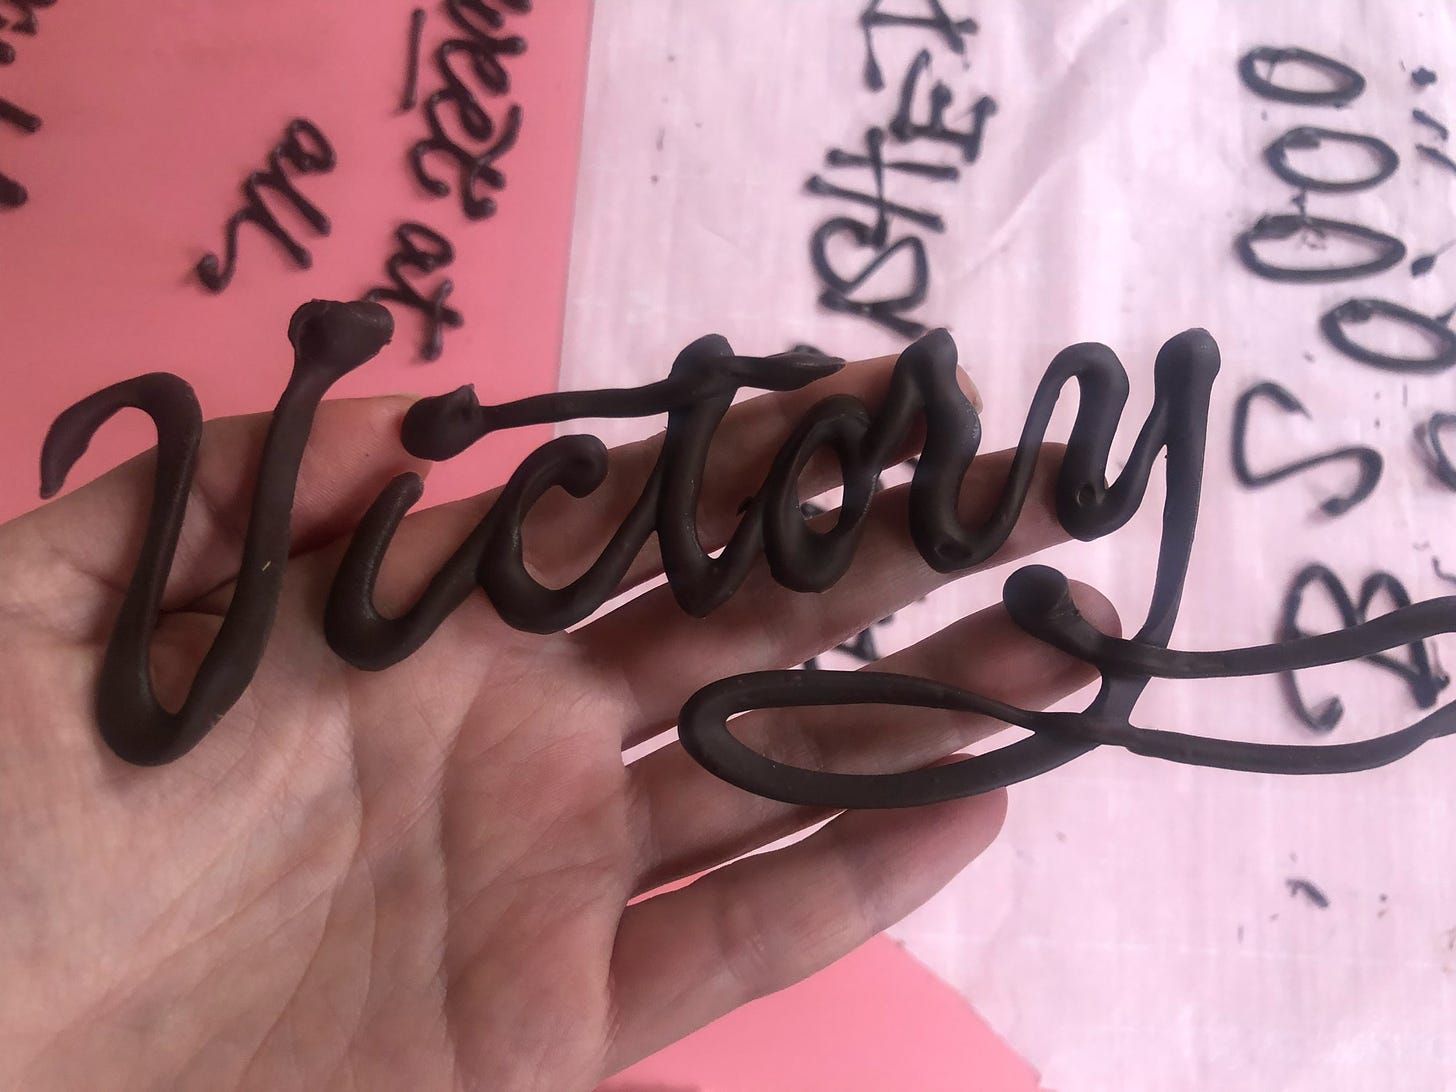 A hand holds "victory" lettered in untempered, dull chocolate over a parchment paper work surface with additional chocolate letters.